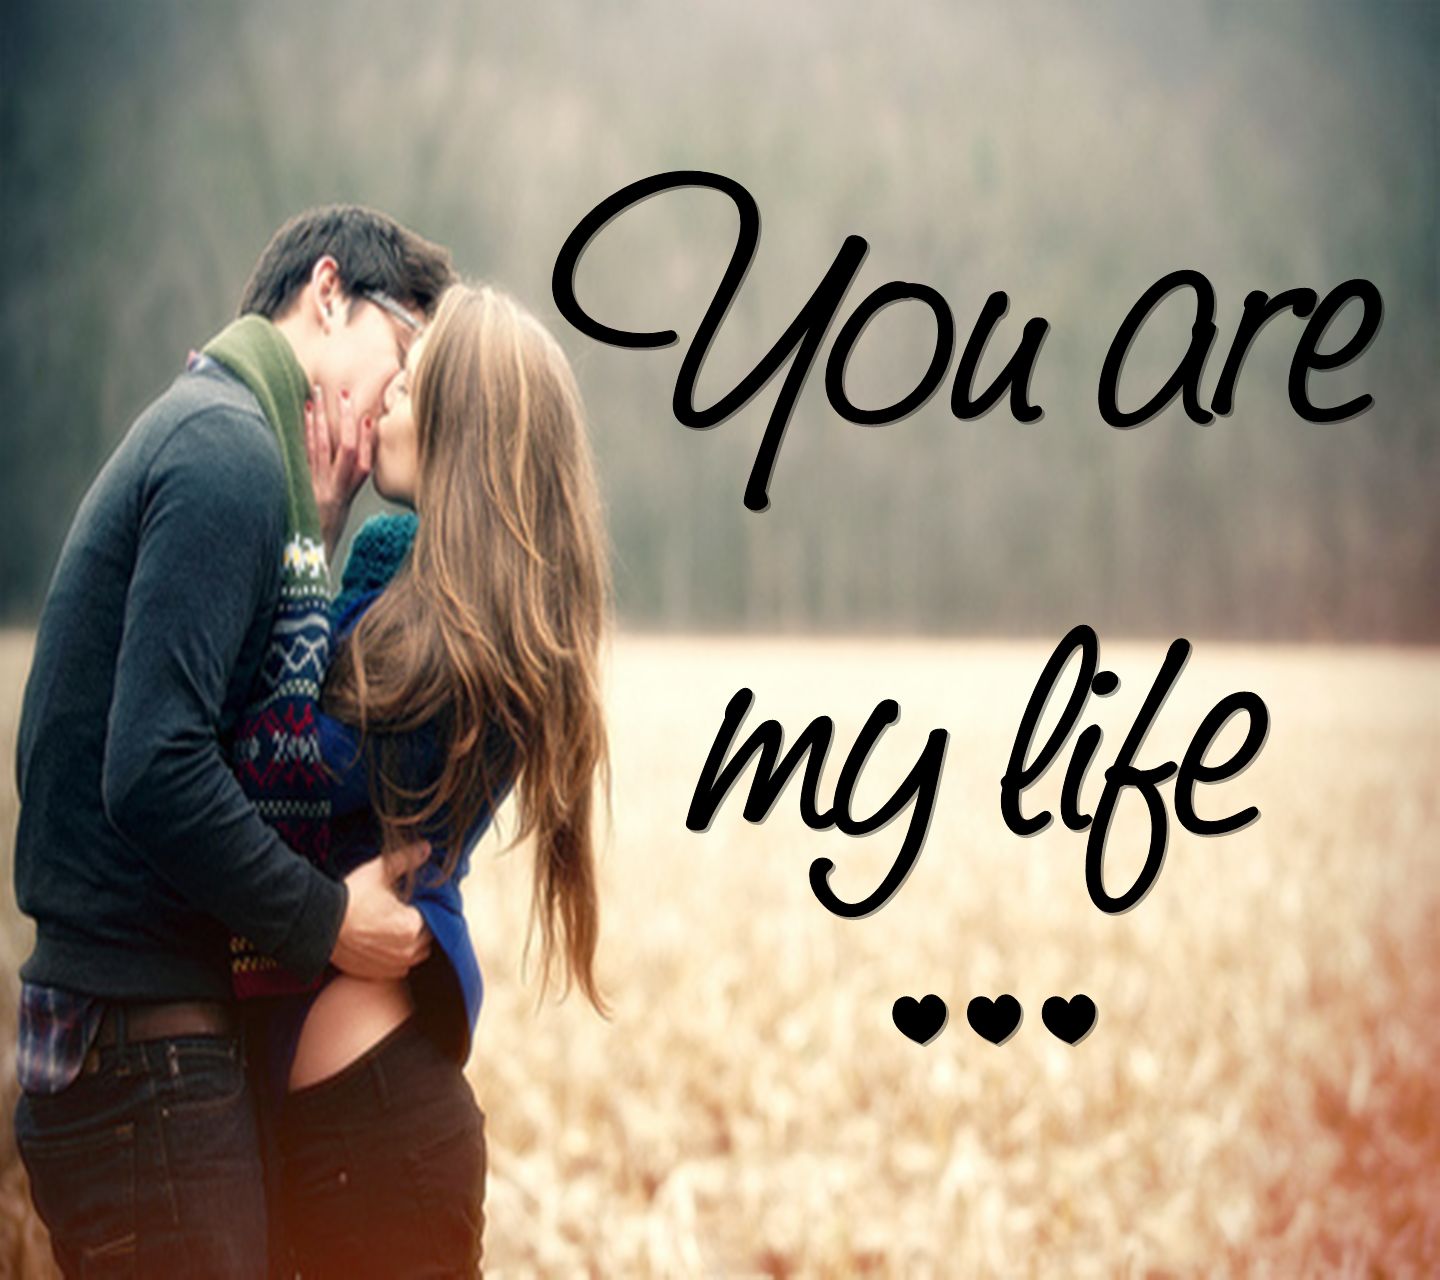 Love Couple Kiss With Quotes Image Get